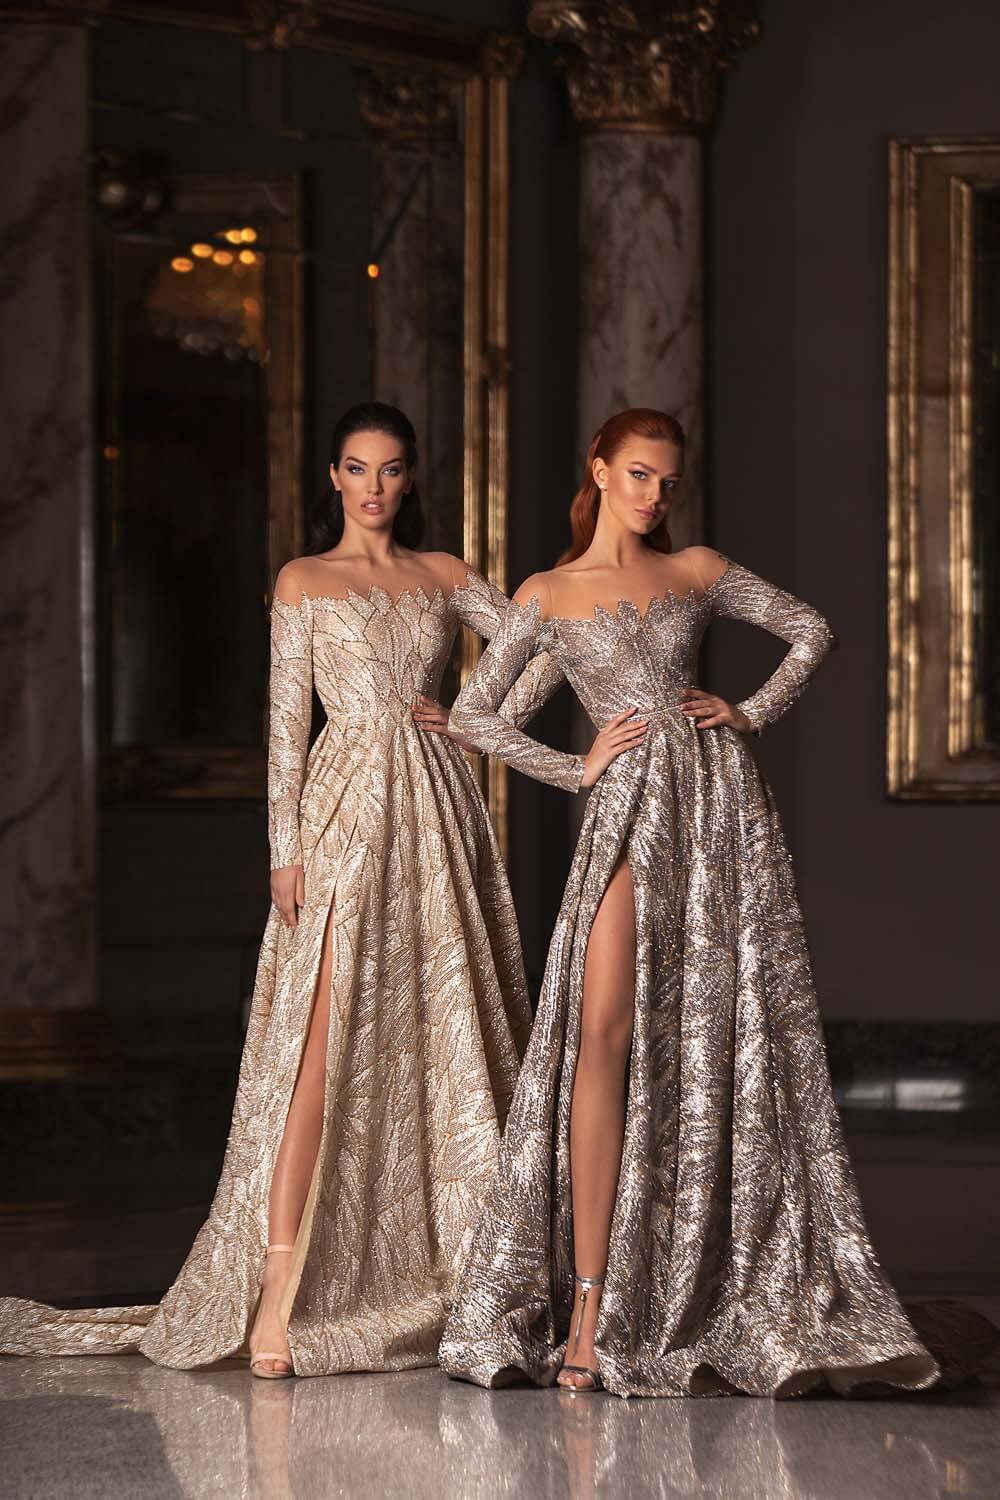 Check out These Evening Dresses 2022 from Esposa